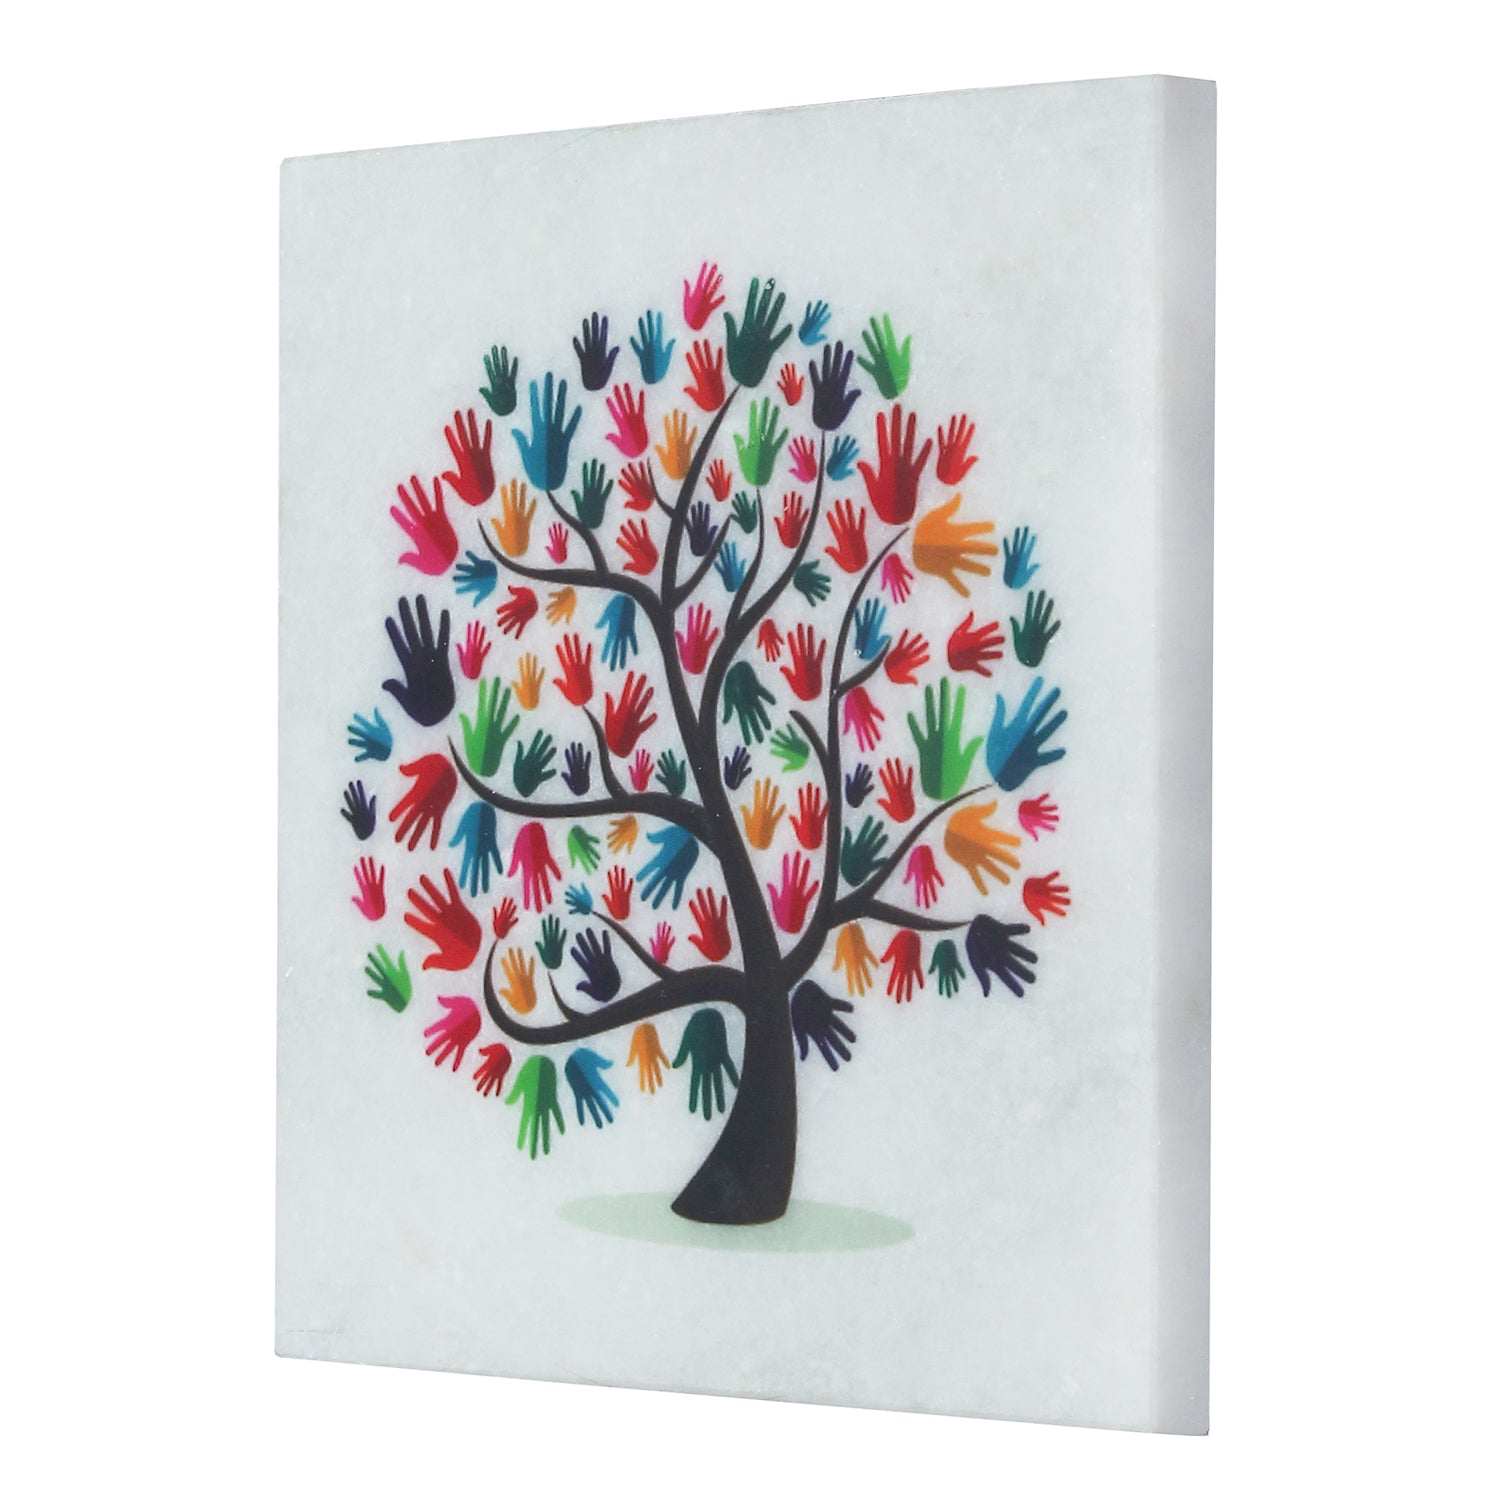 Colorful Hands Tree Painting On Marble Square Tile 3